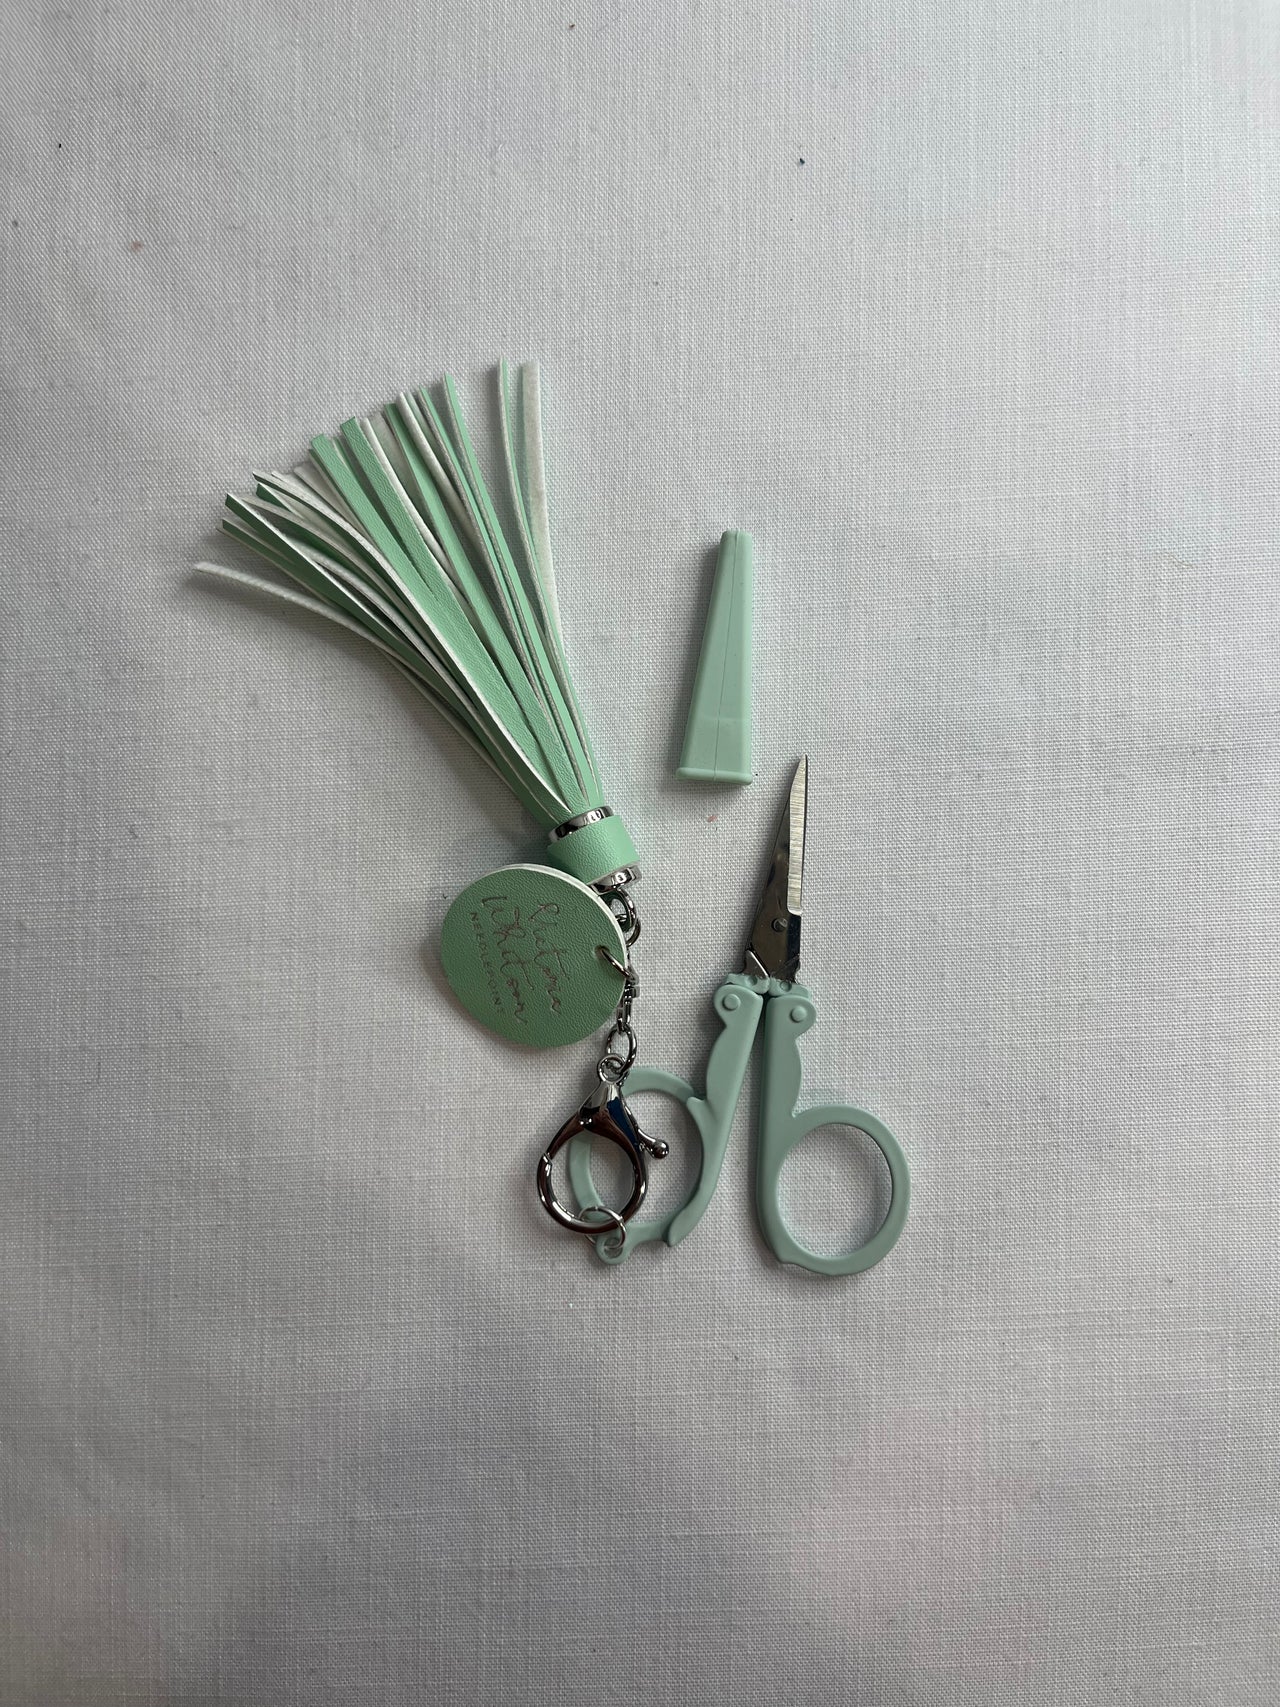 Accessories – Tagged scissors – Needlepoint by Wildflowers